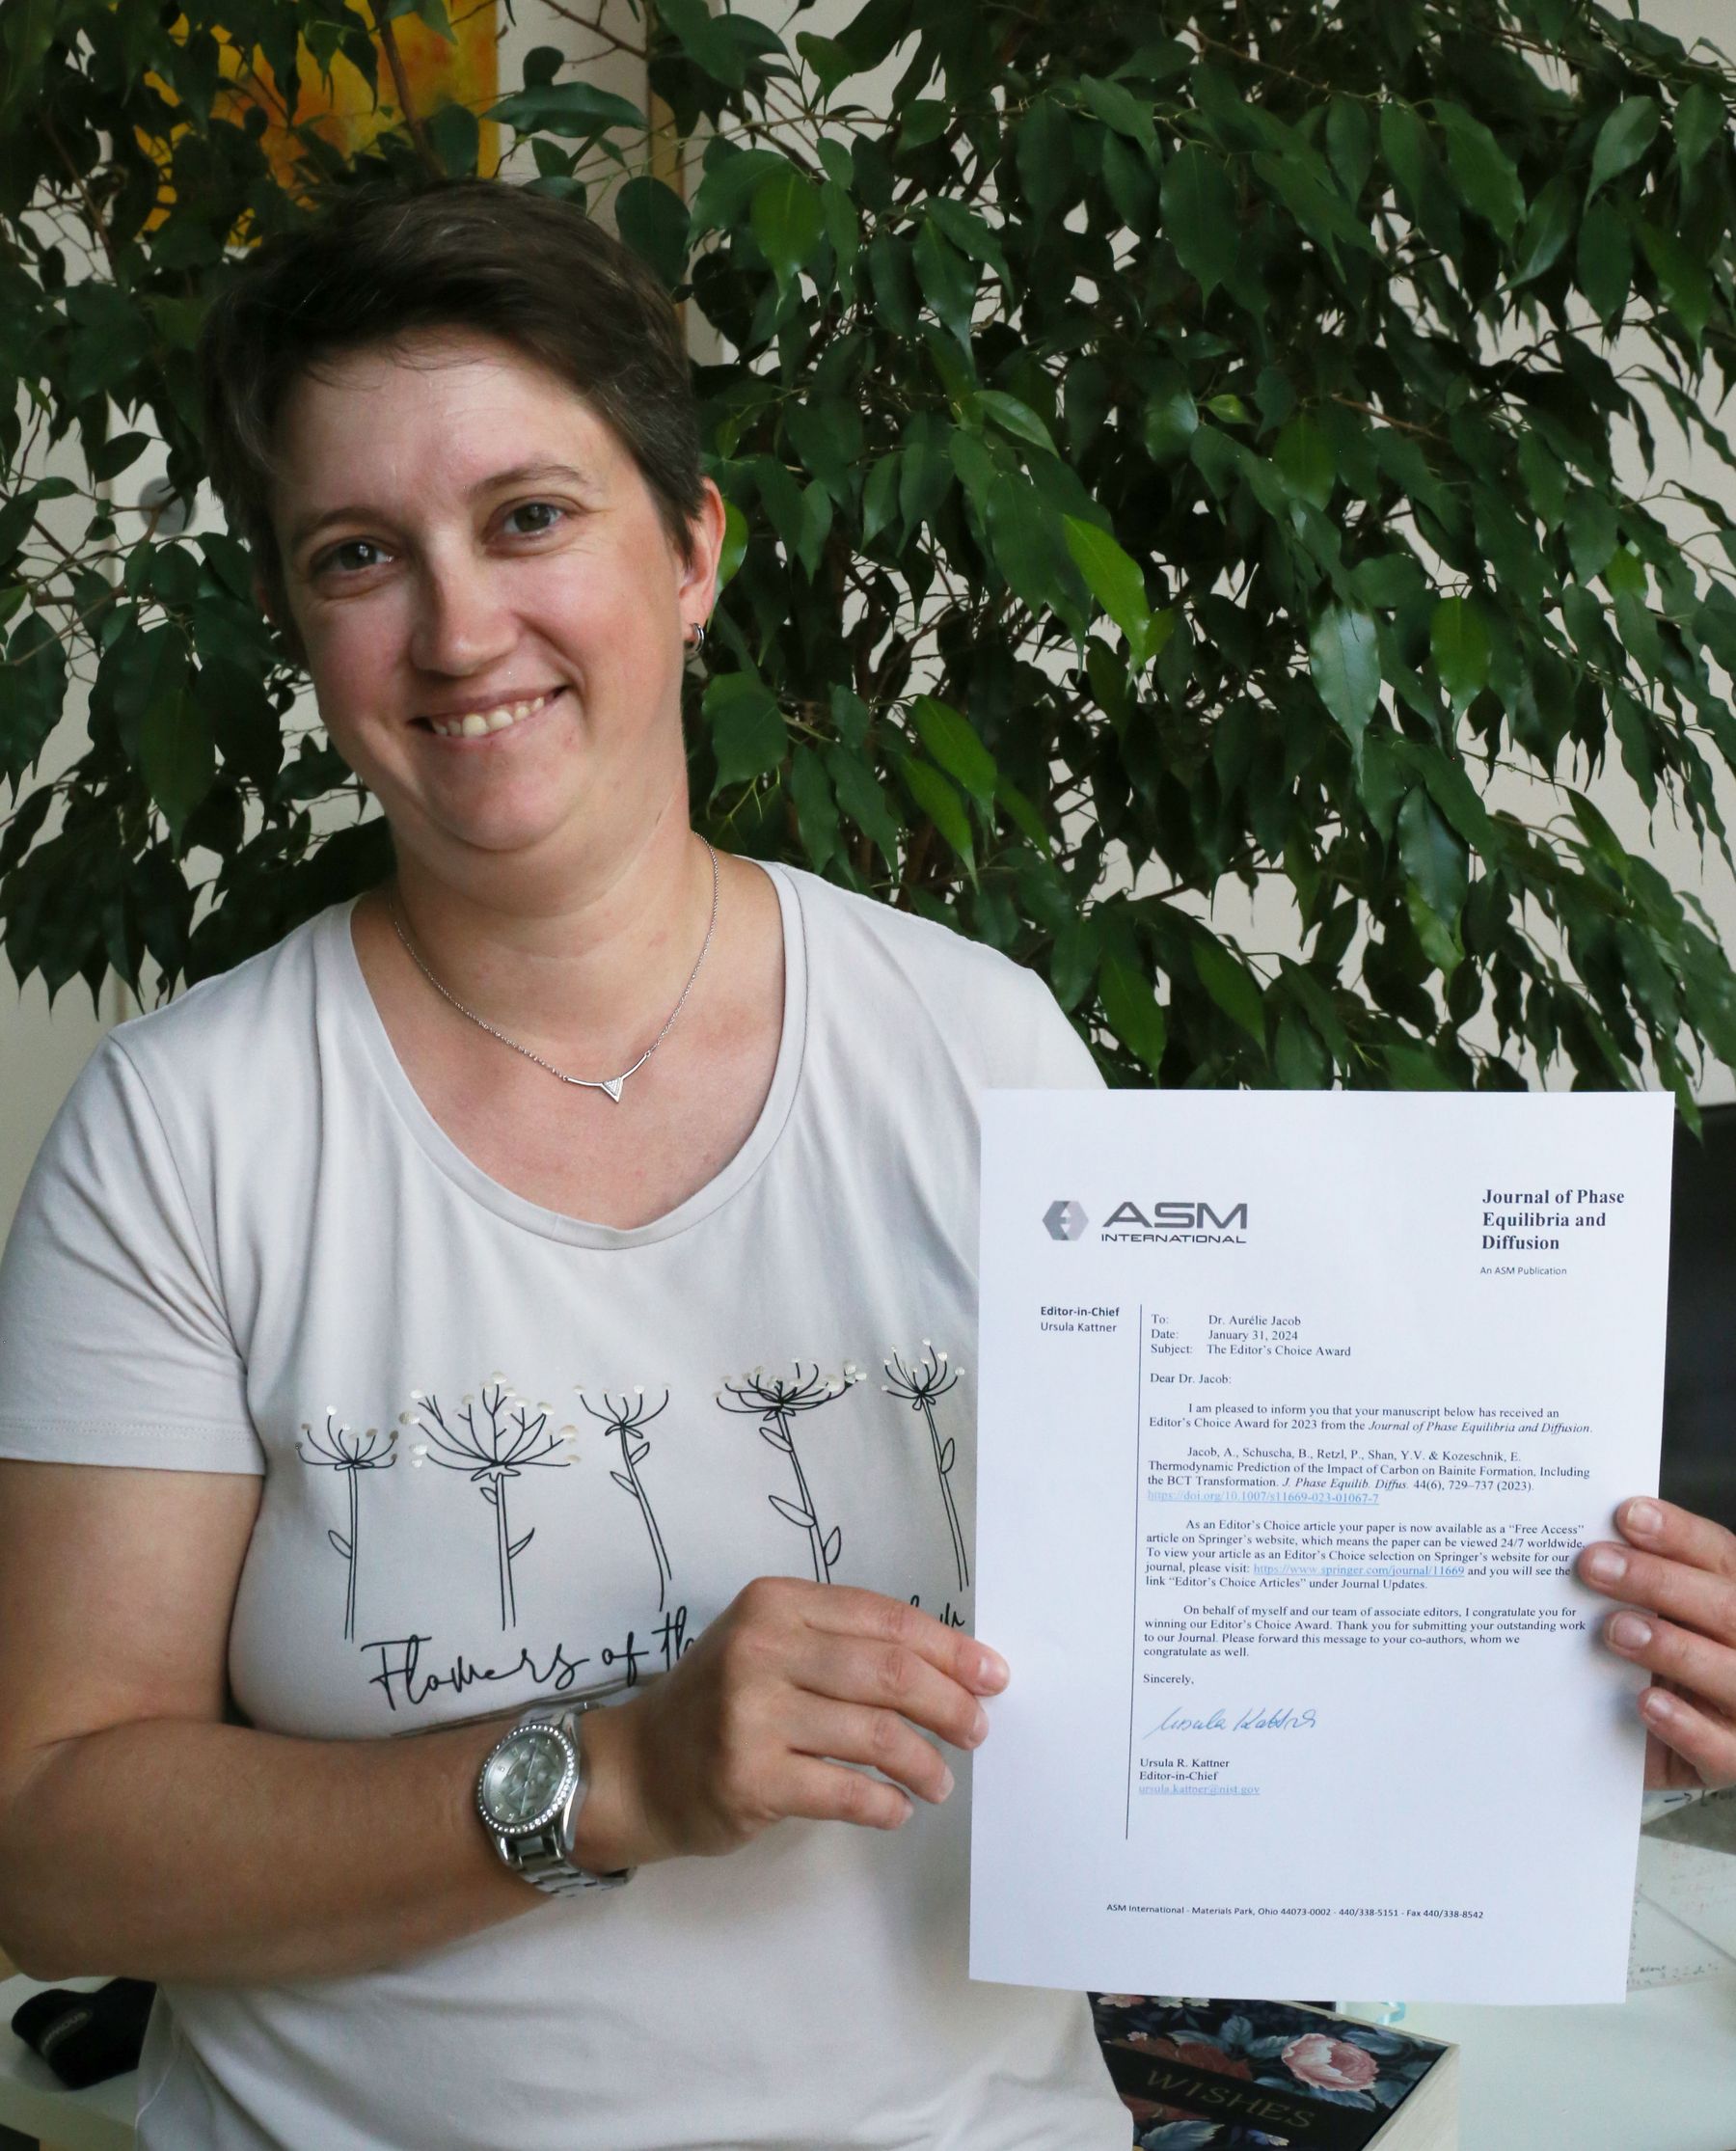 Picture of Aurélie Jacob receiving her Editor's choice award 2023 by the Journal of Phase Equilibria and Diffusion